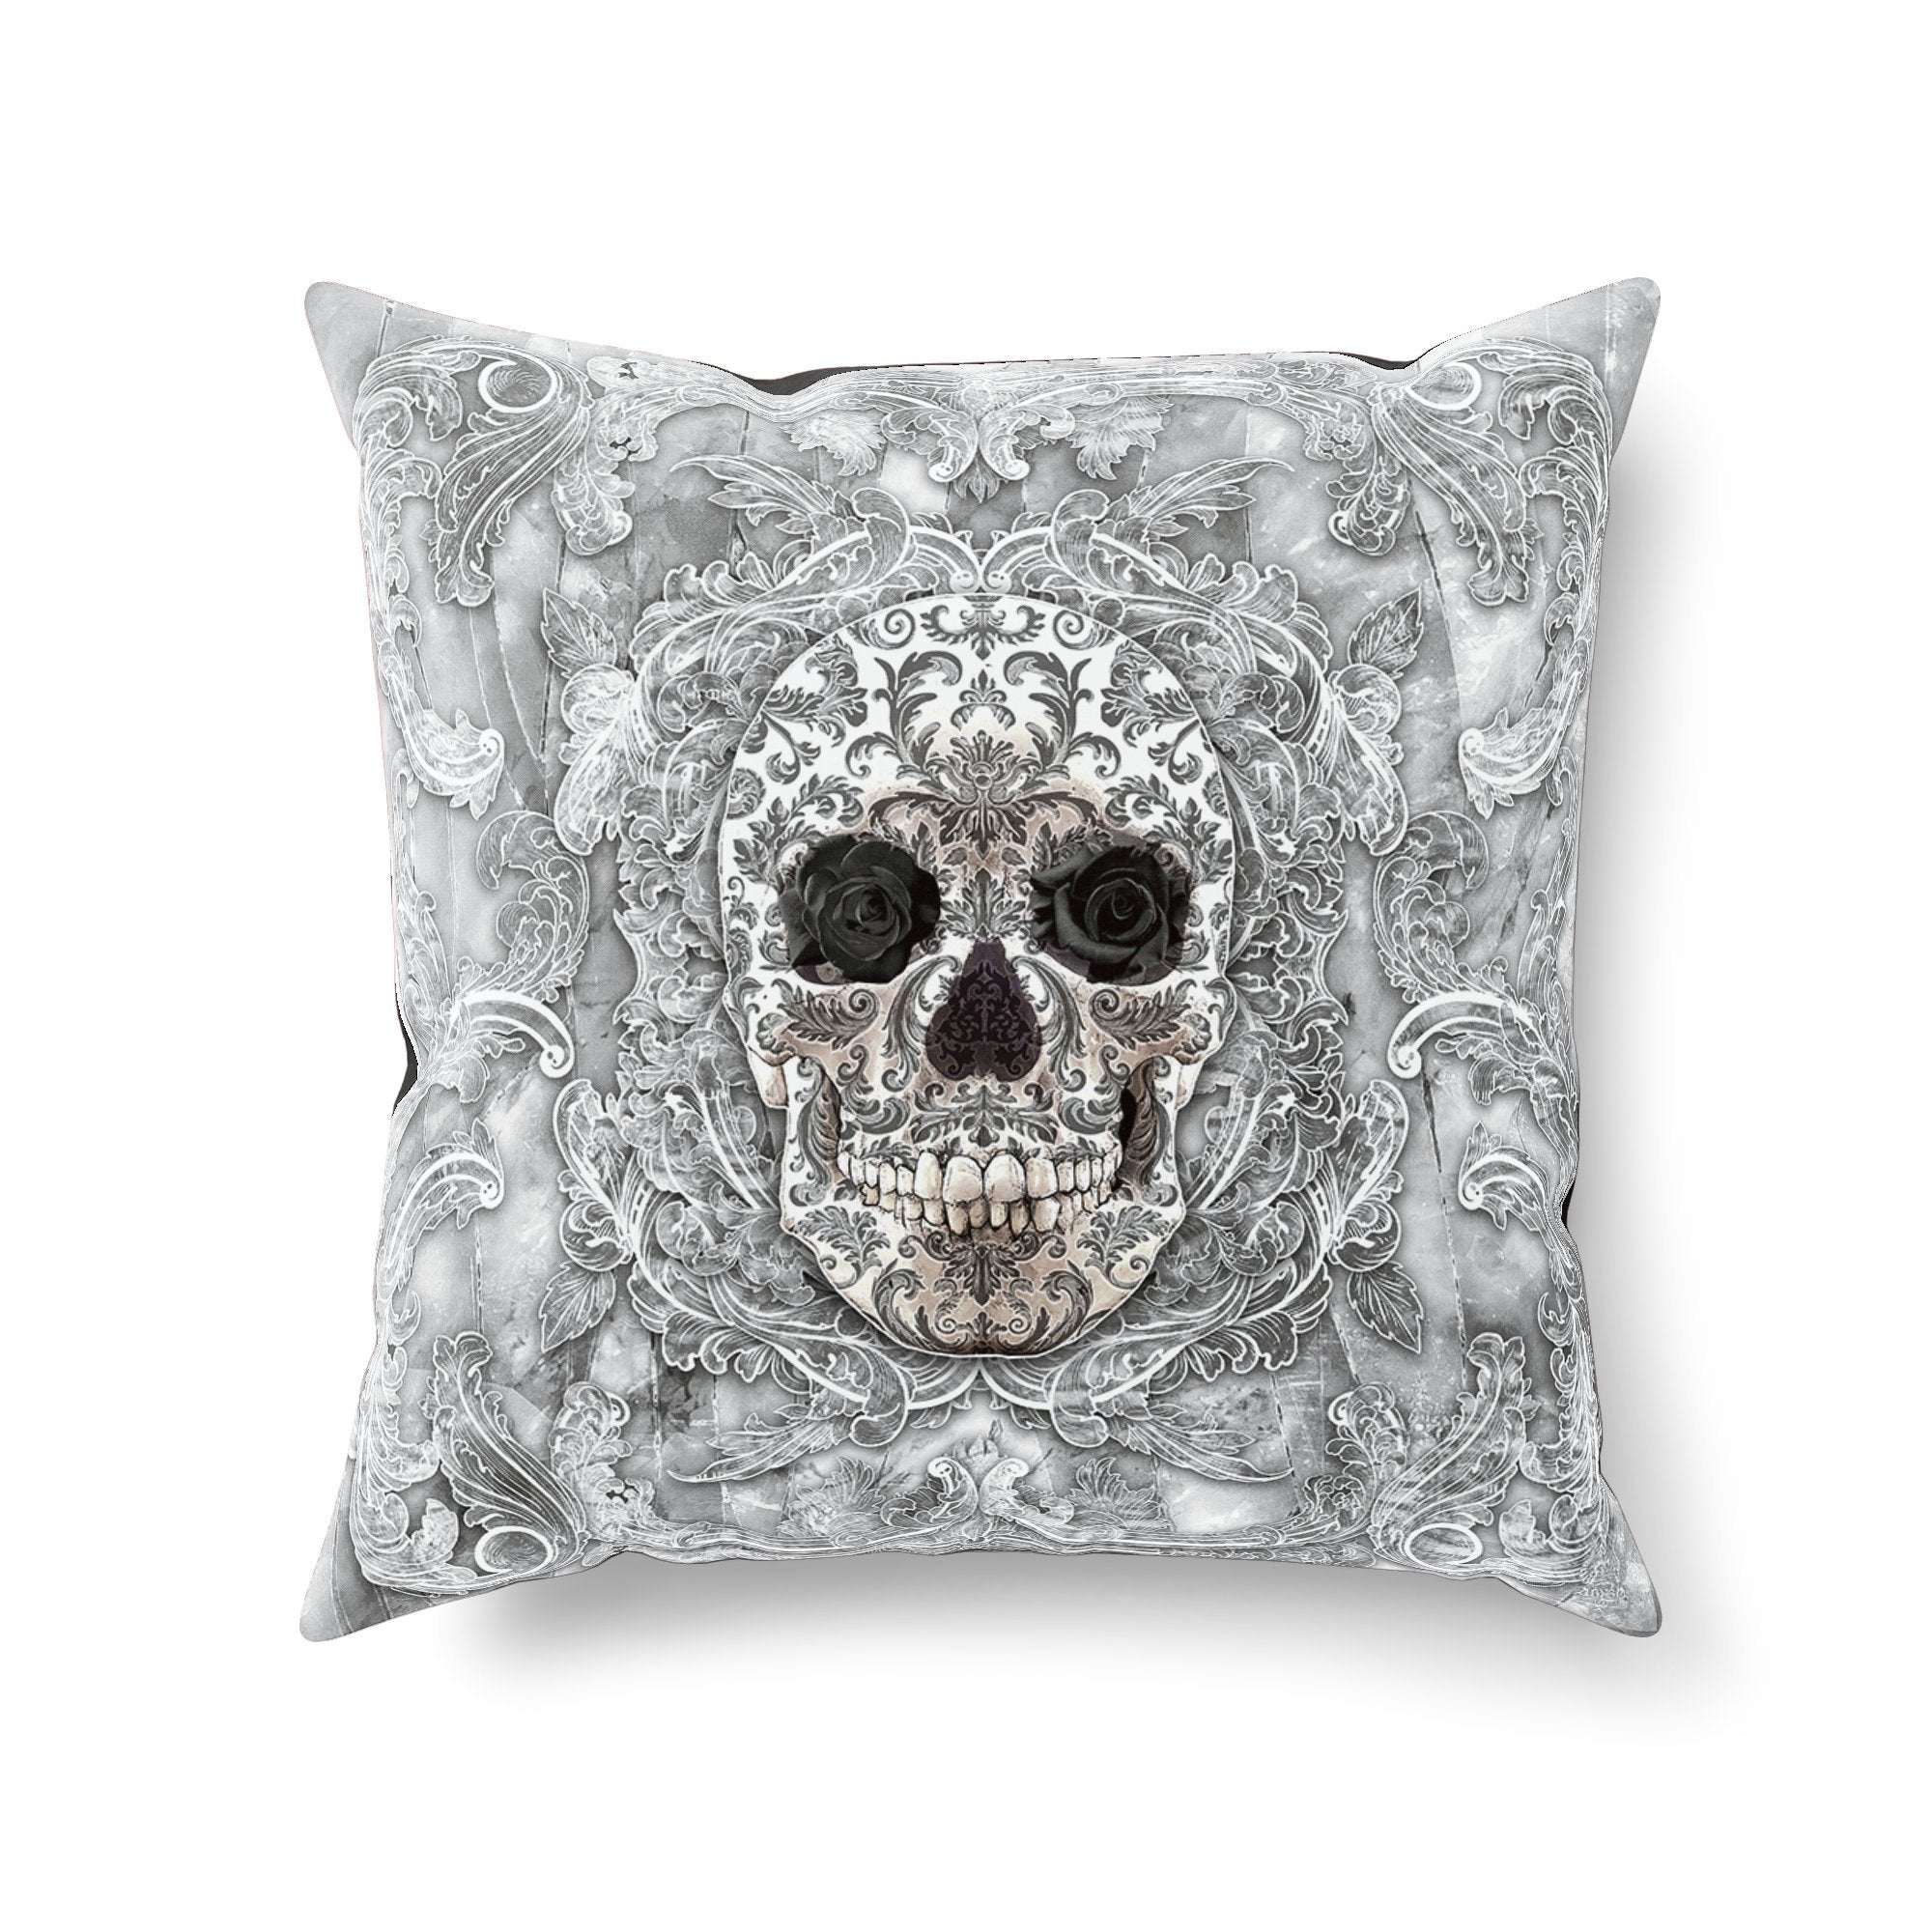 Skull Throw Pillow, Decorative Accent Cushion, Horror and White Goth Room Decor, Macabre Art, Alternative Home - Stone - Abysm Internal